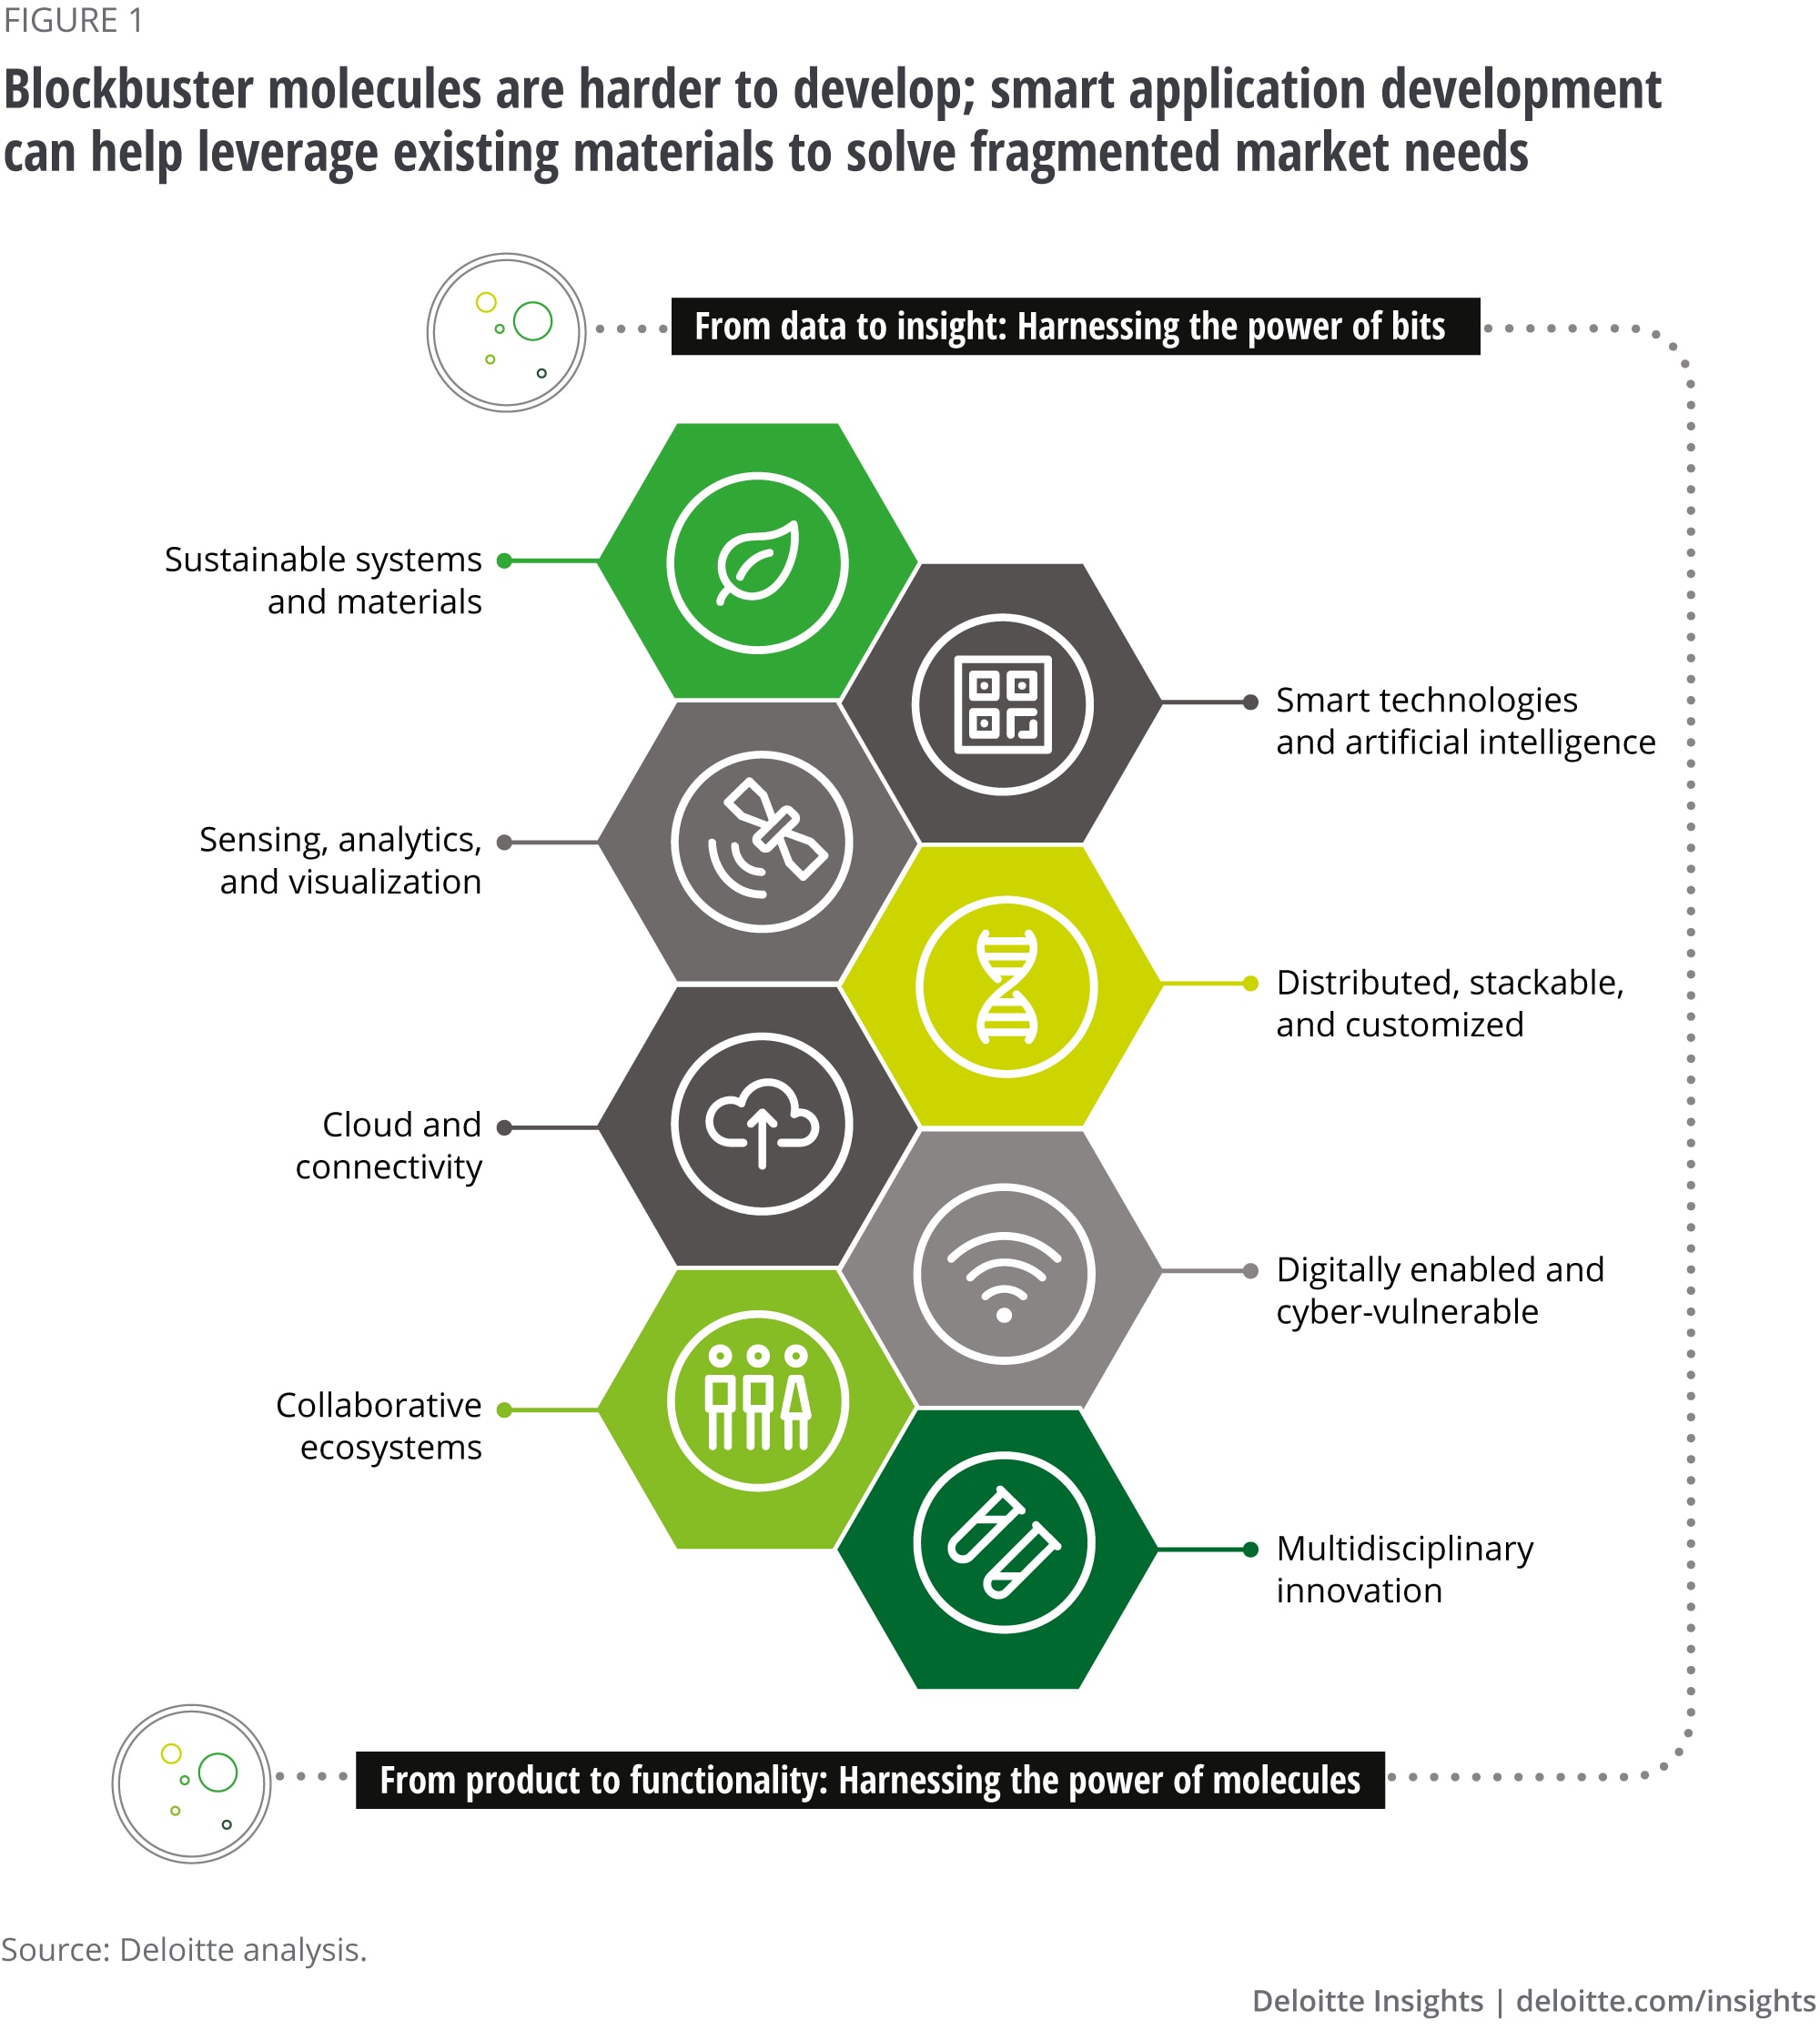 As blockbuster molecules are harder to develop, smart application development helps leverage existing materials to solve fragmented market needs